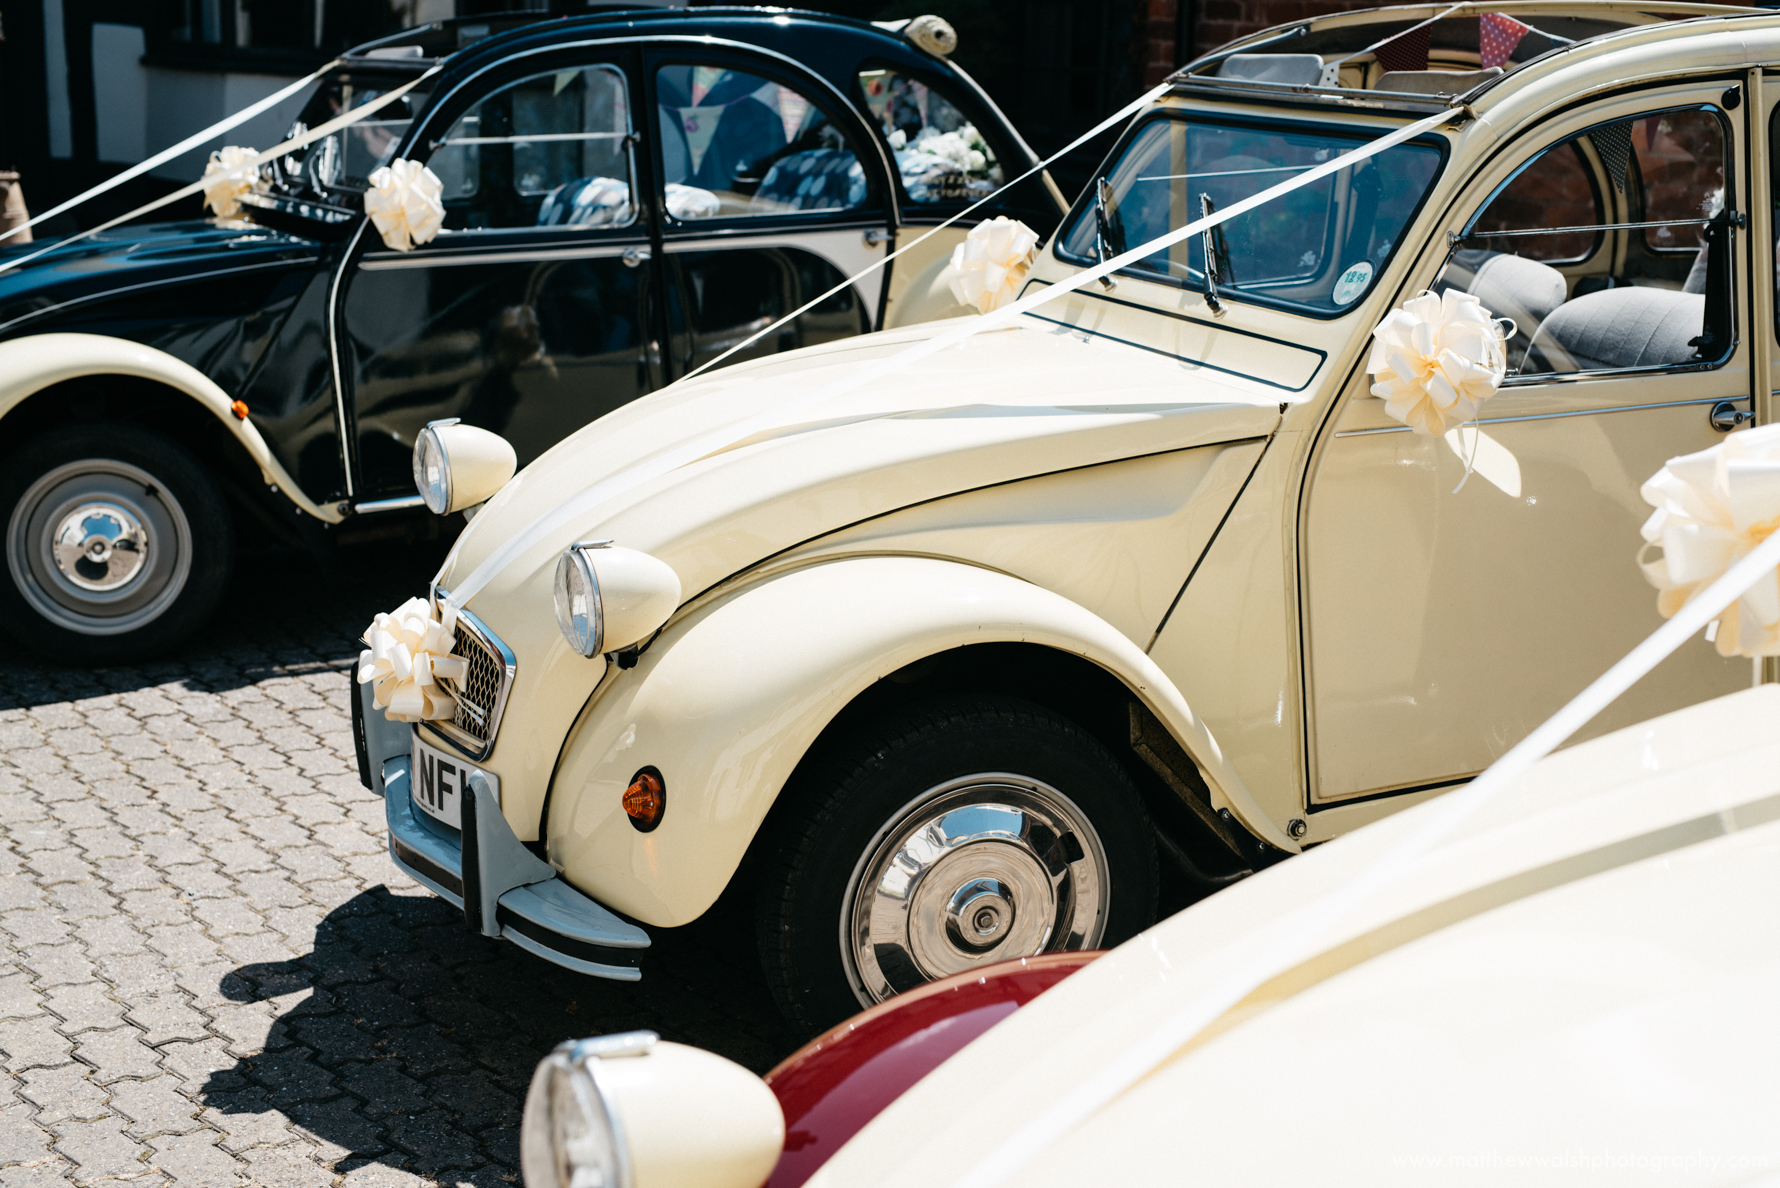 2cv Wedding cars ready to take the bridal party to the church